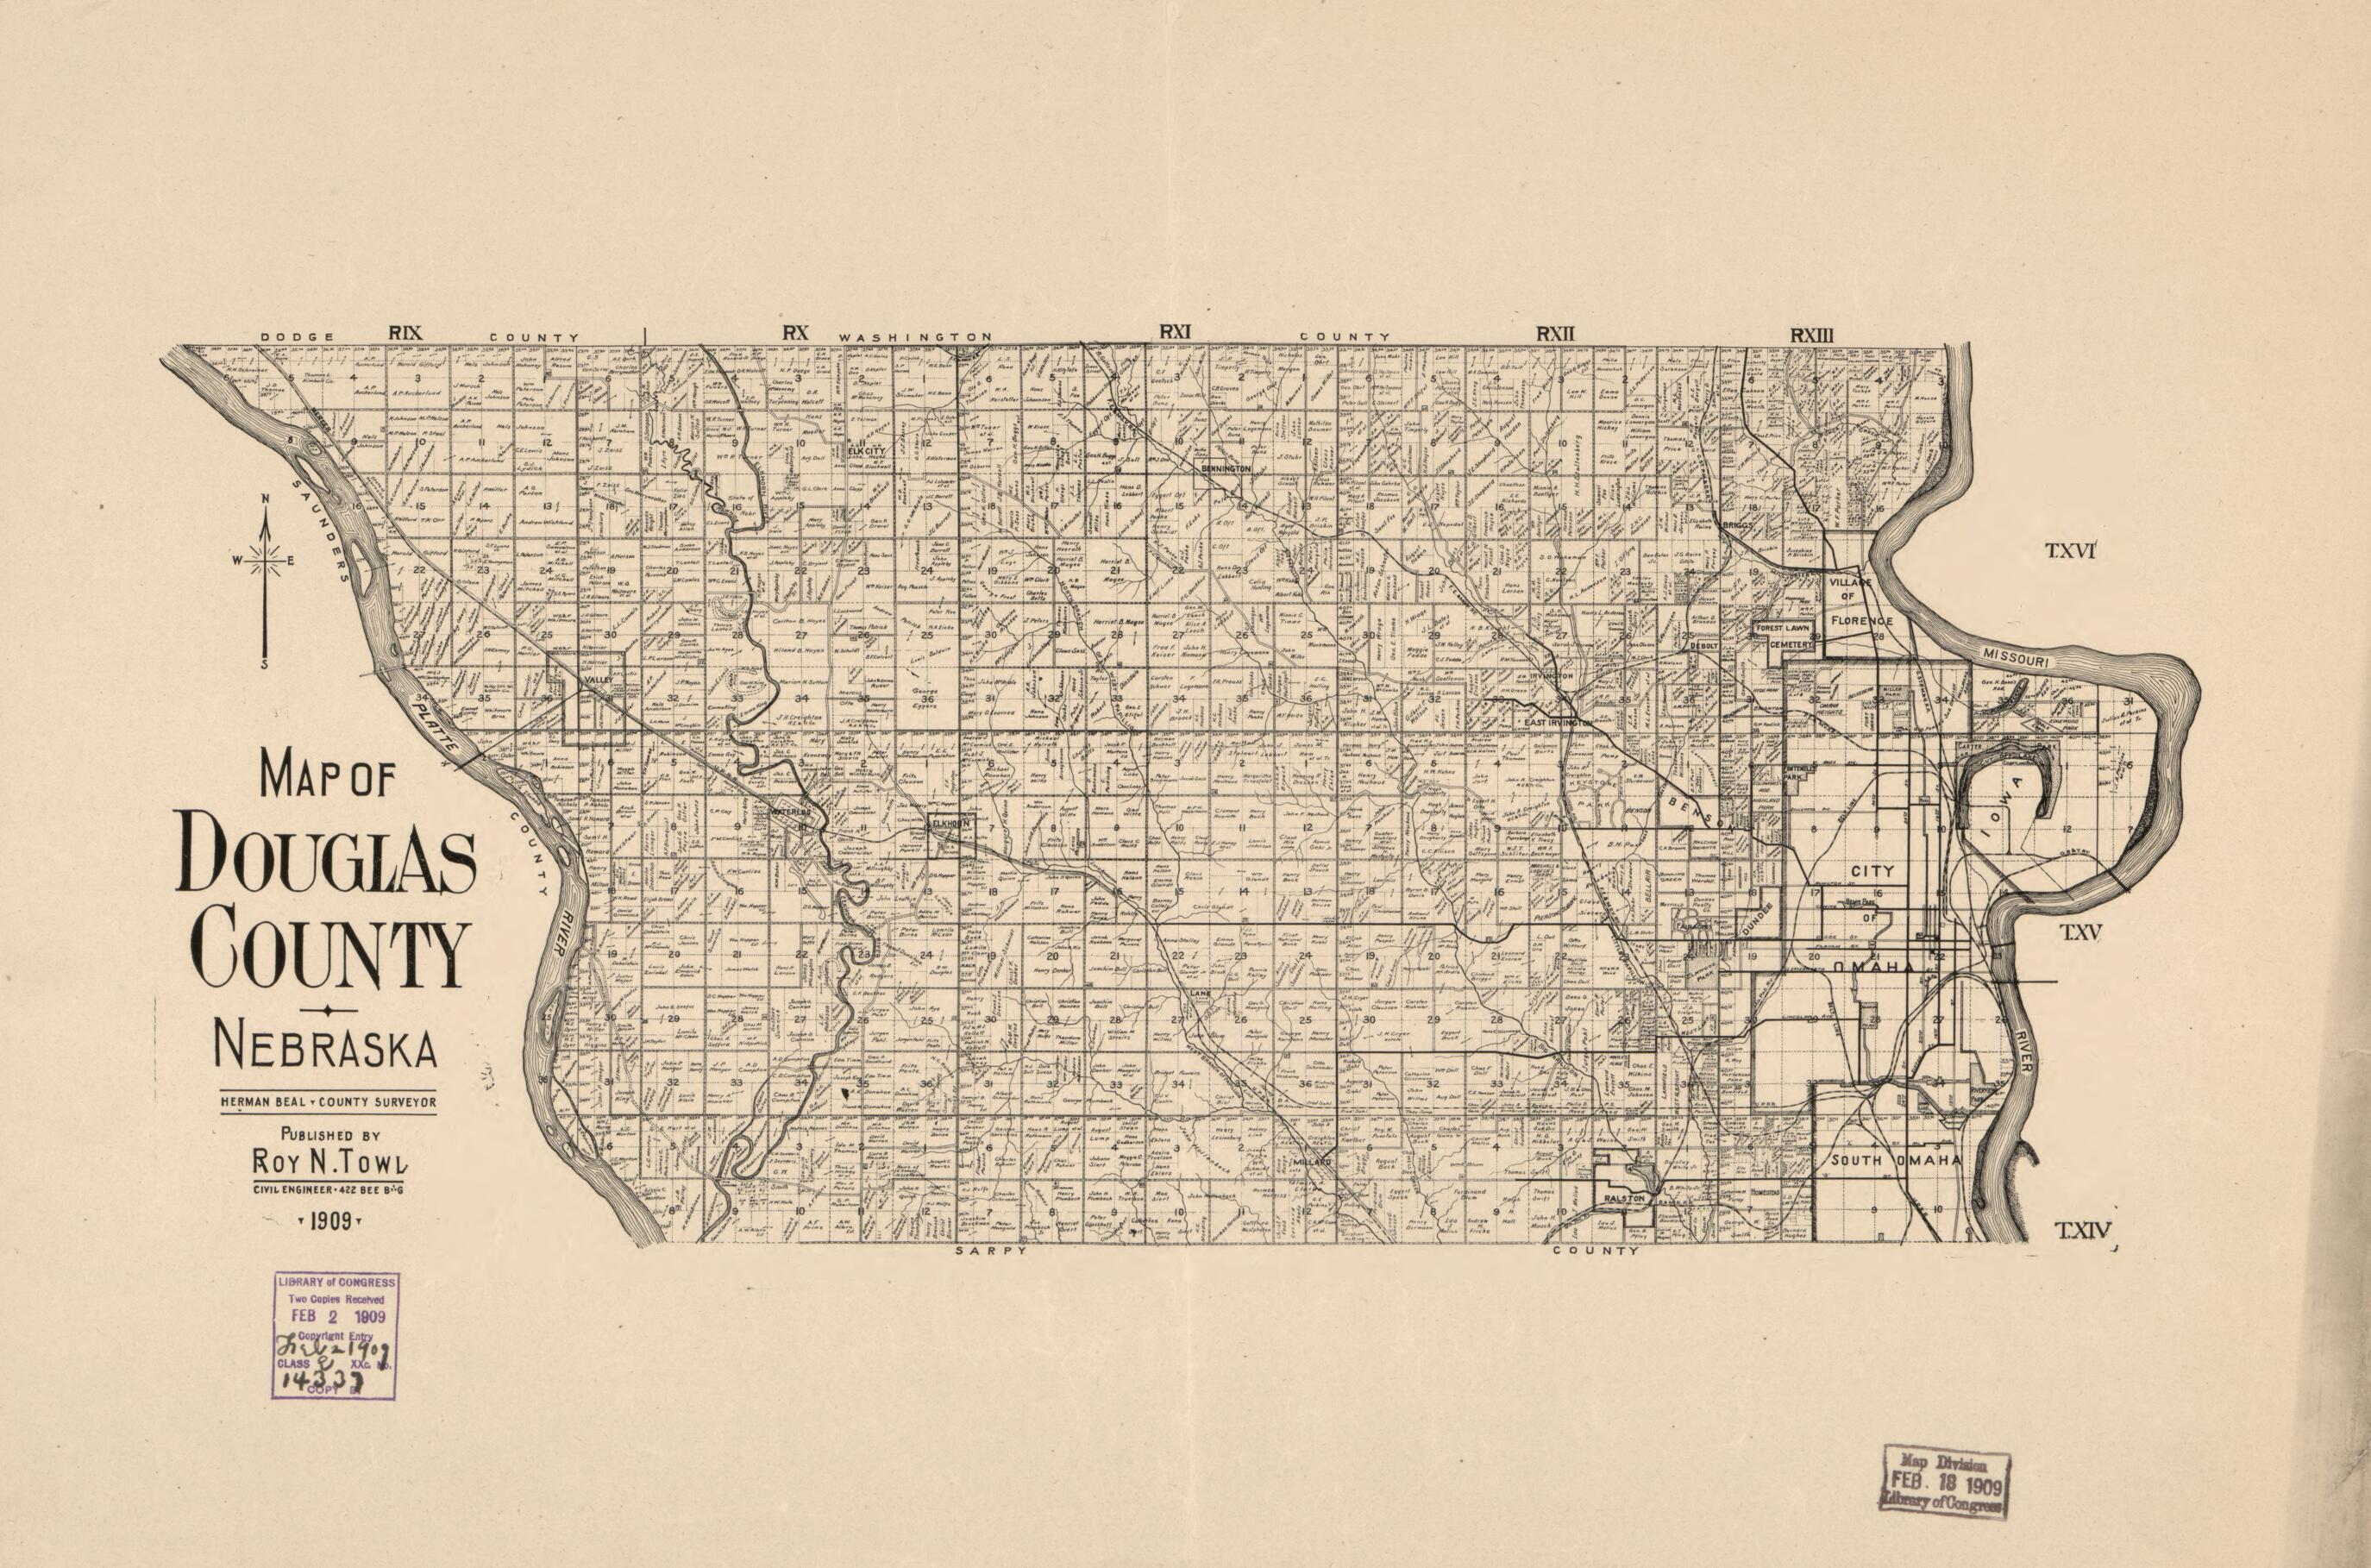 This old map of Map of Douglas County, Nebraska from 1909 was created by Herman Beal in 1909